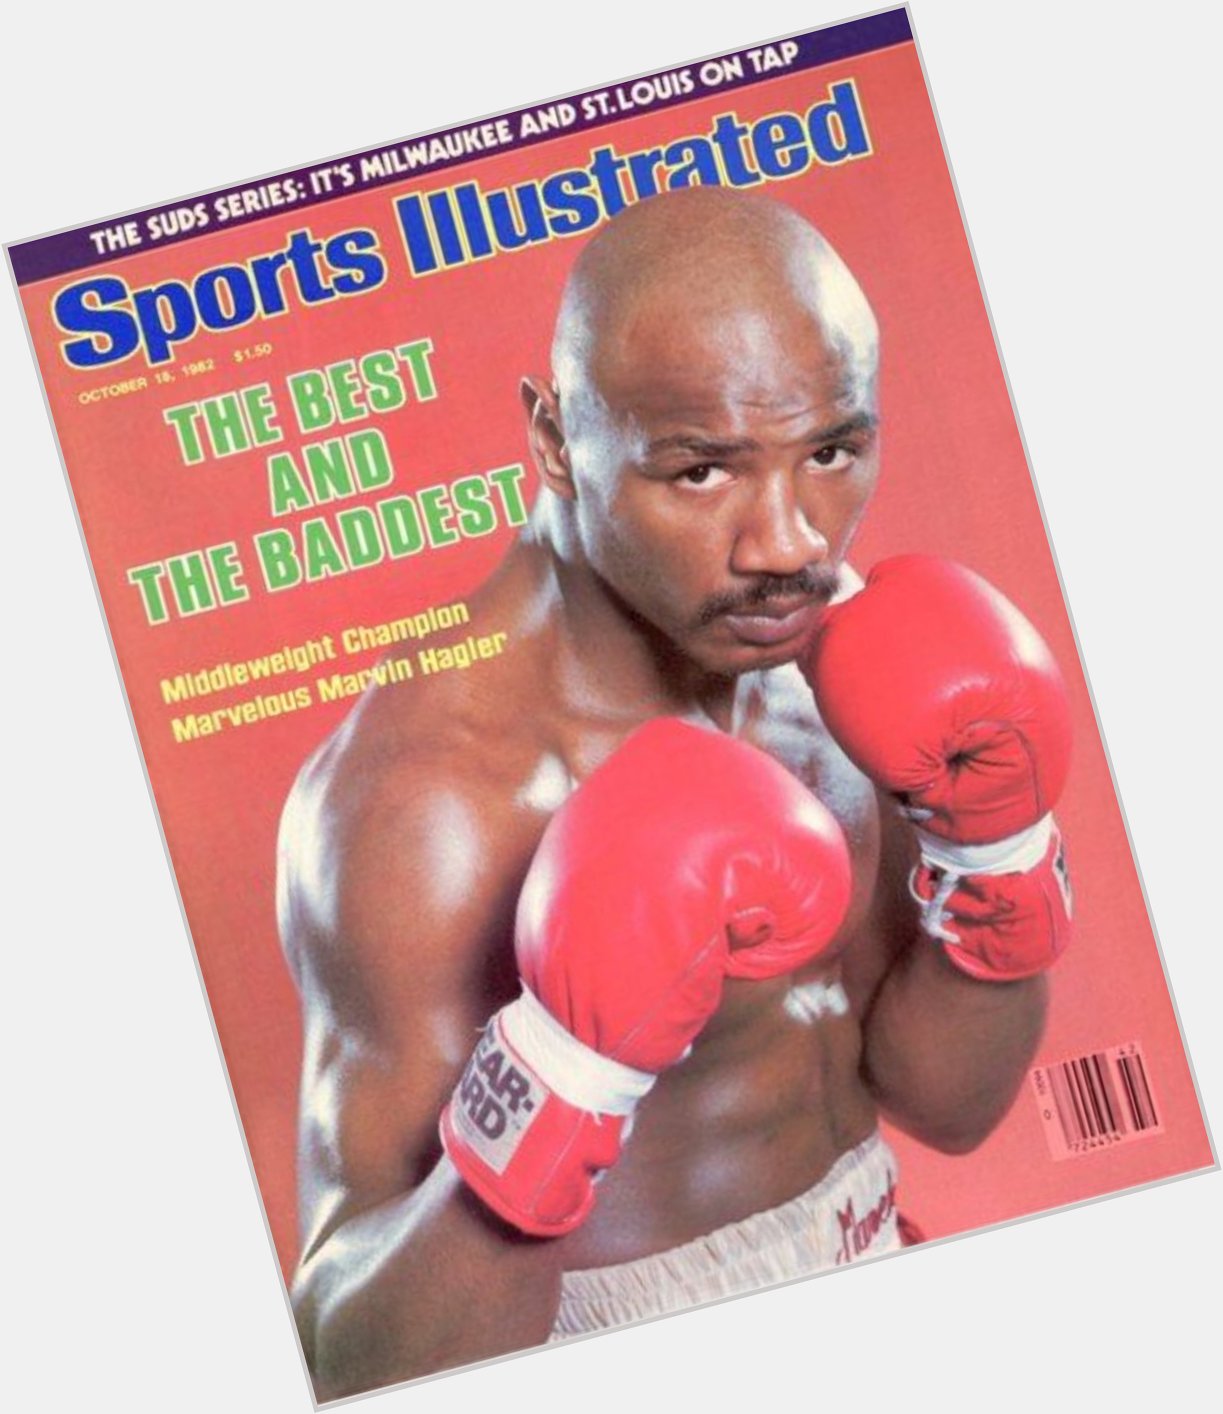 Happy 65th birthday to the Brockton legend, the one and only Marvelous Marvin Hagler! 